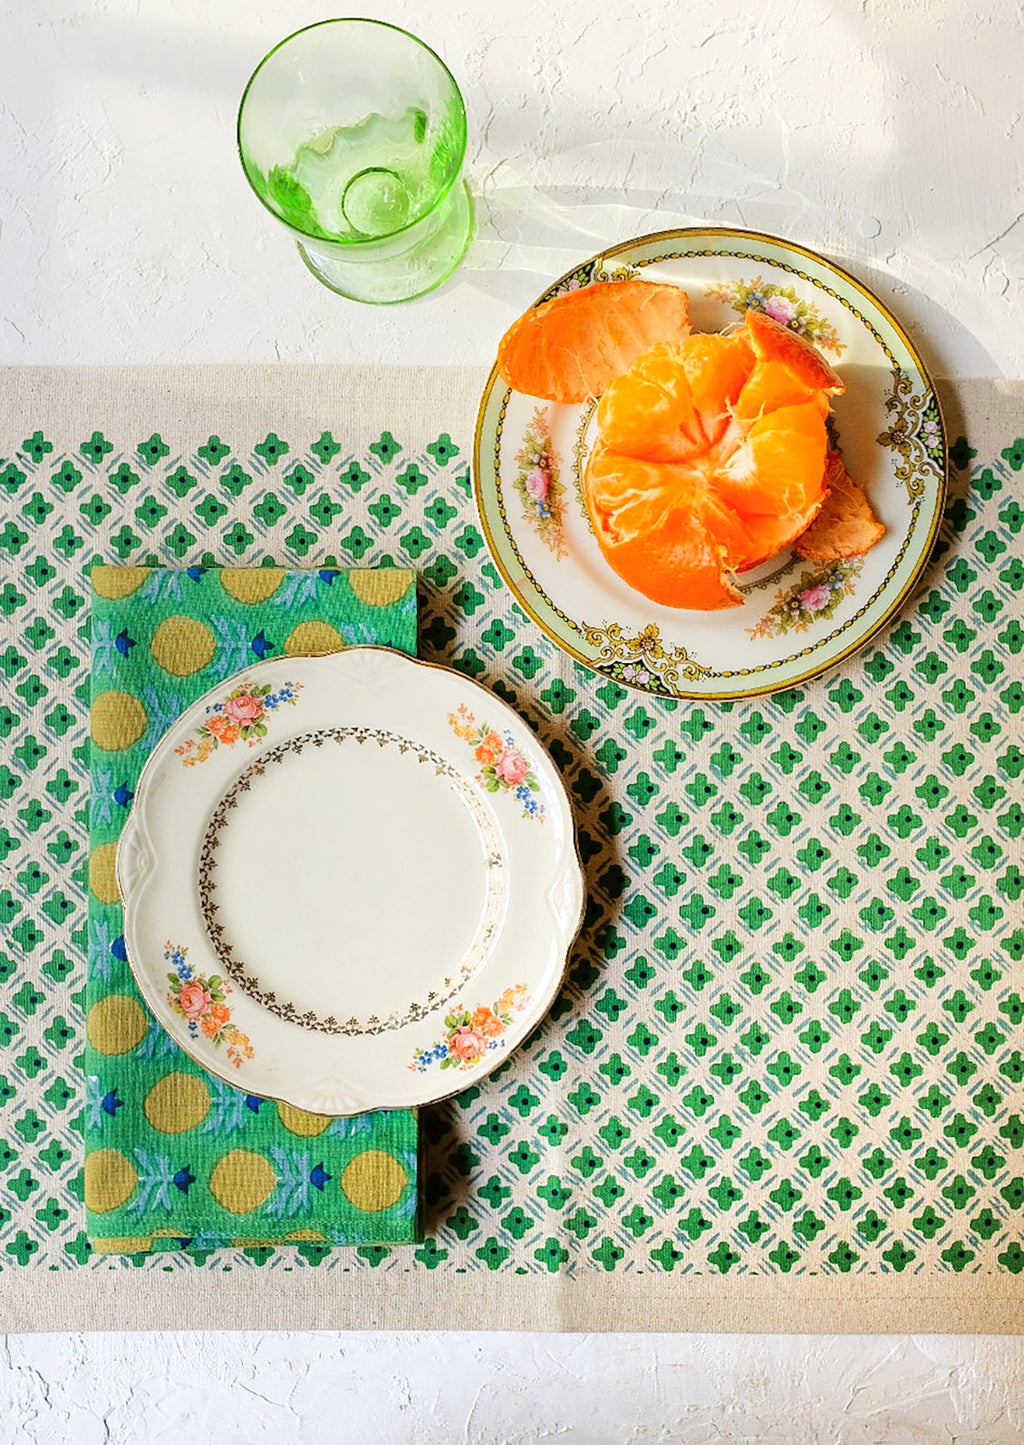 2: A placemat as part of a green themed table setting.